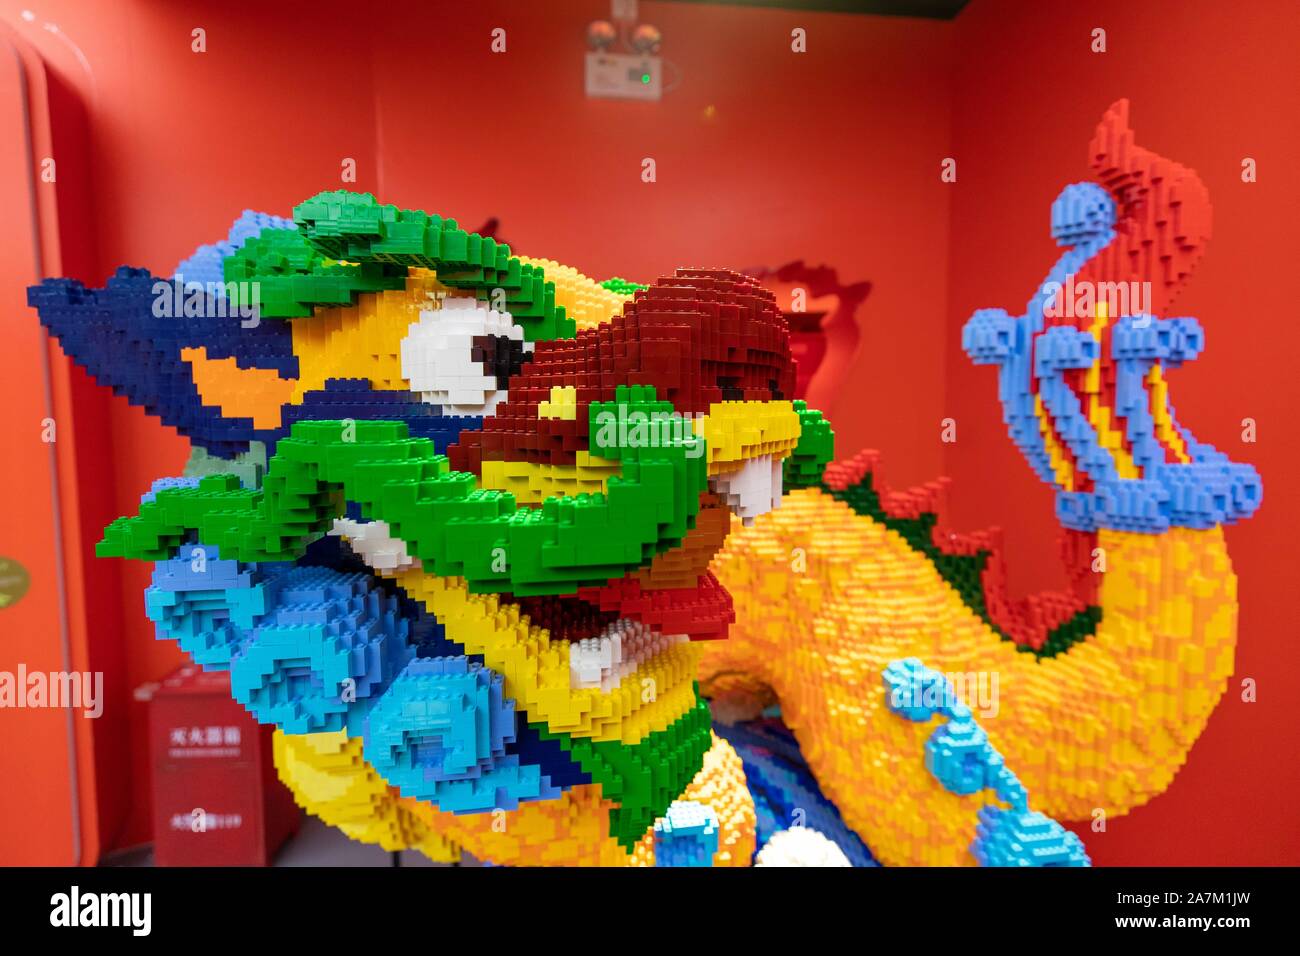 A Lego toy model of the dragon is on display during the 'Dynasty of Brick - Lego Chinese Culture Exhibition' in Beijing, China, 5 September 2019. Stock Photo